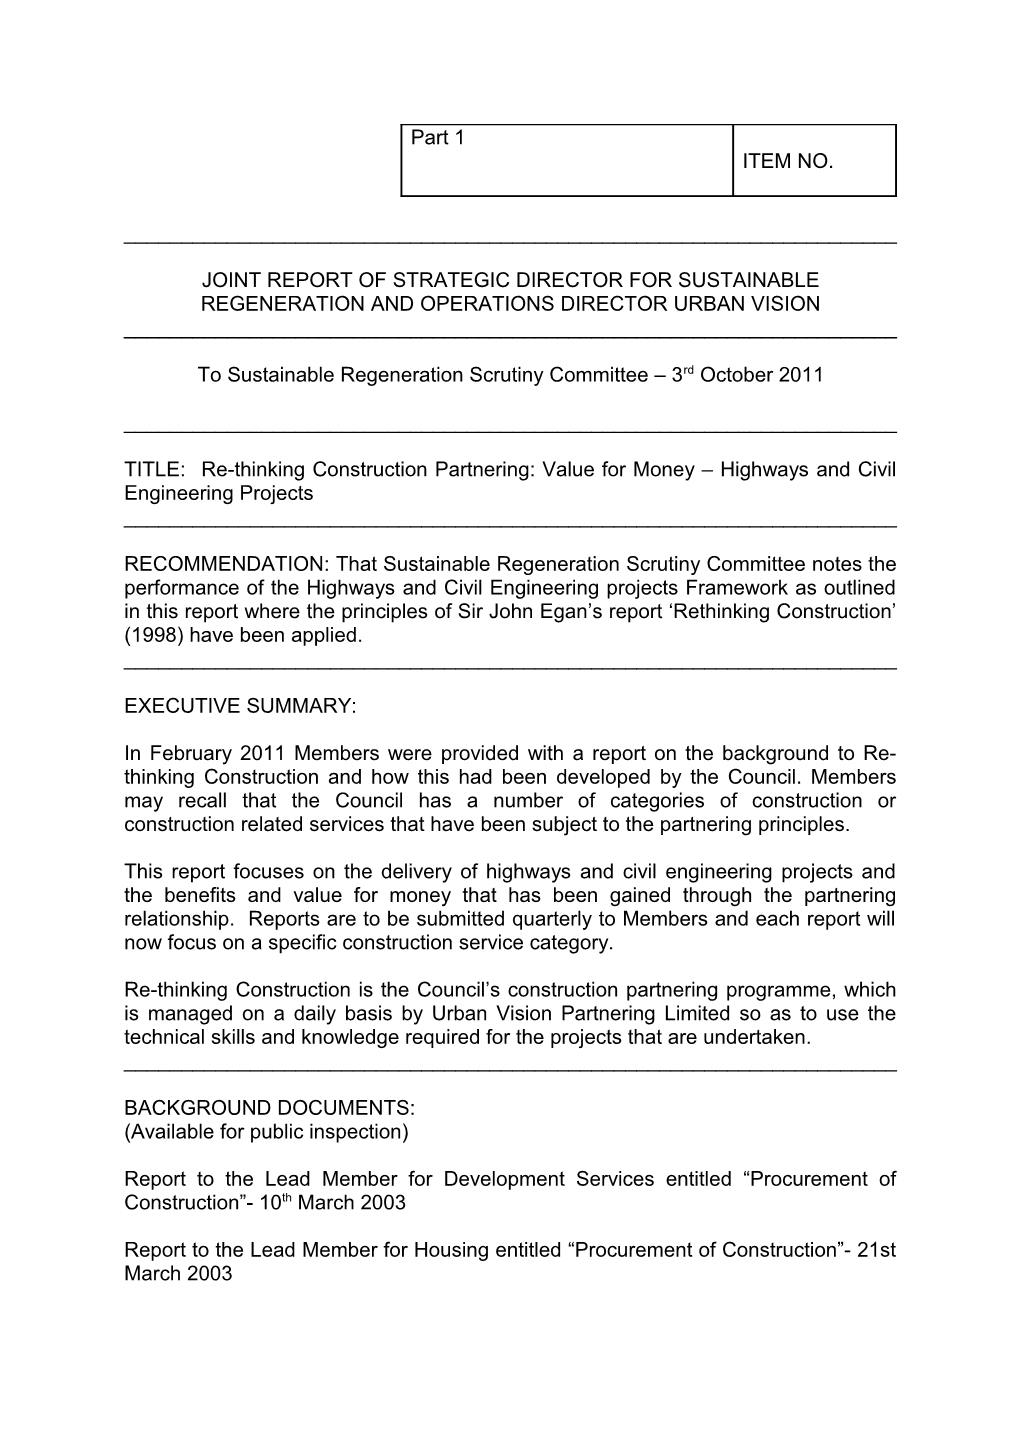 Joint Report of Strategic Director for Sustainable Regeneration and Operations Director